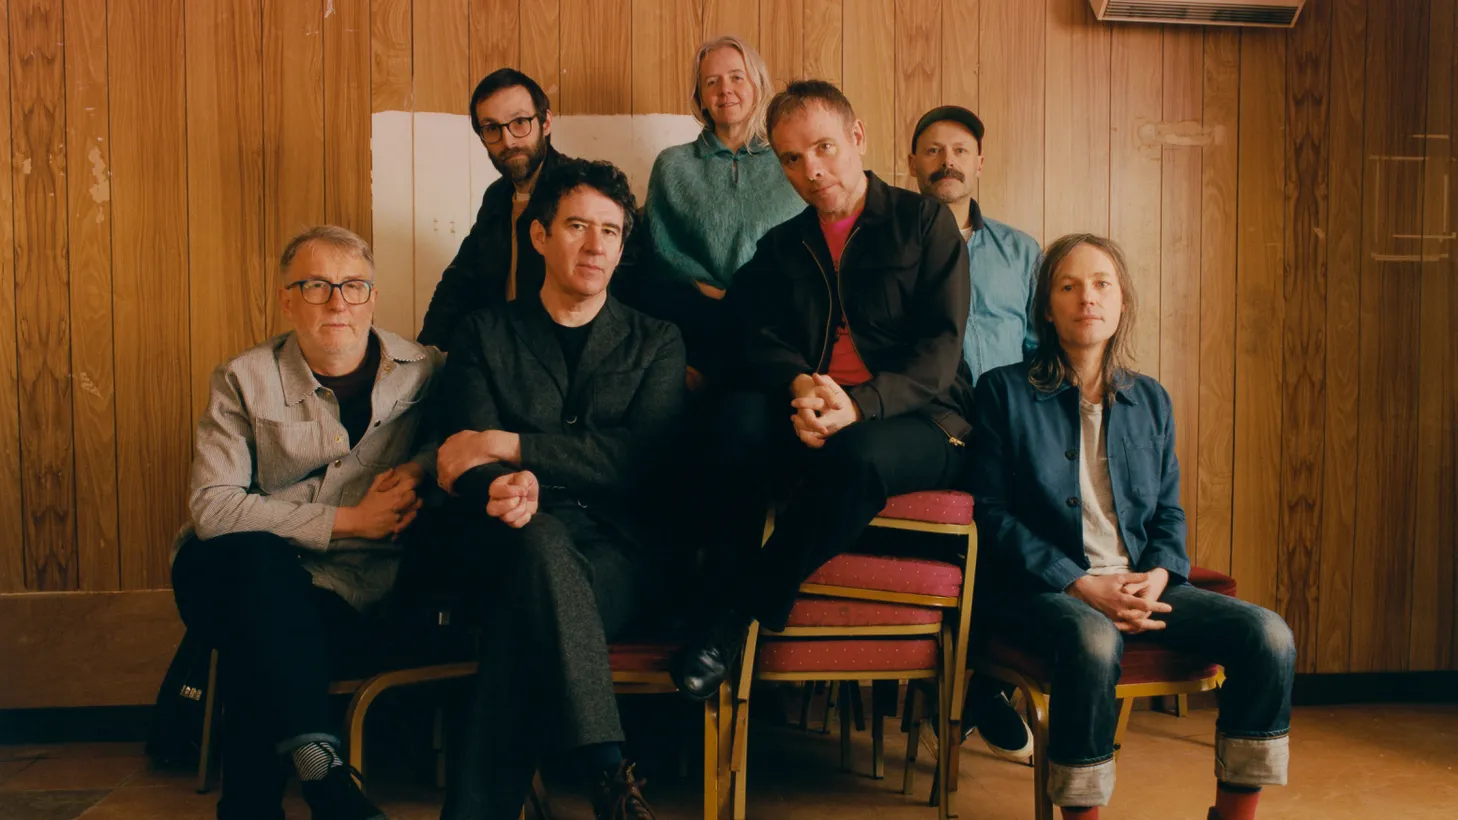 Glasgow’s finest, Belle & Sebastian, are back with their first full length album since 1999.